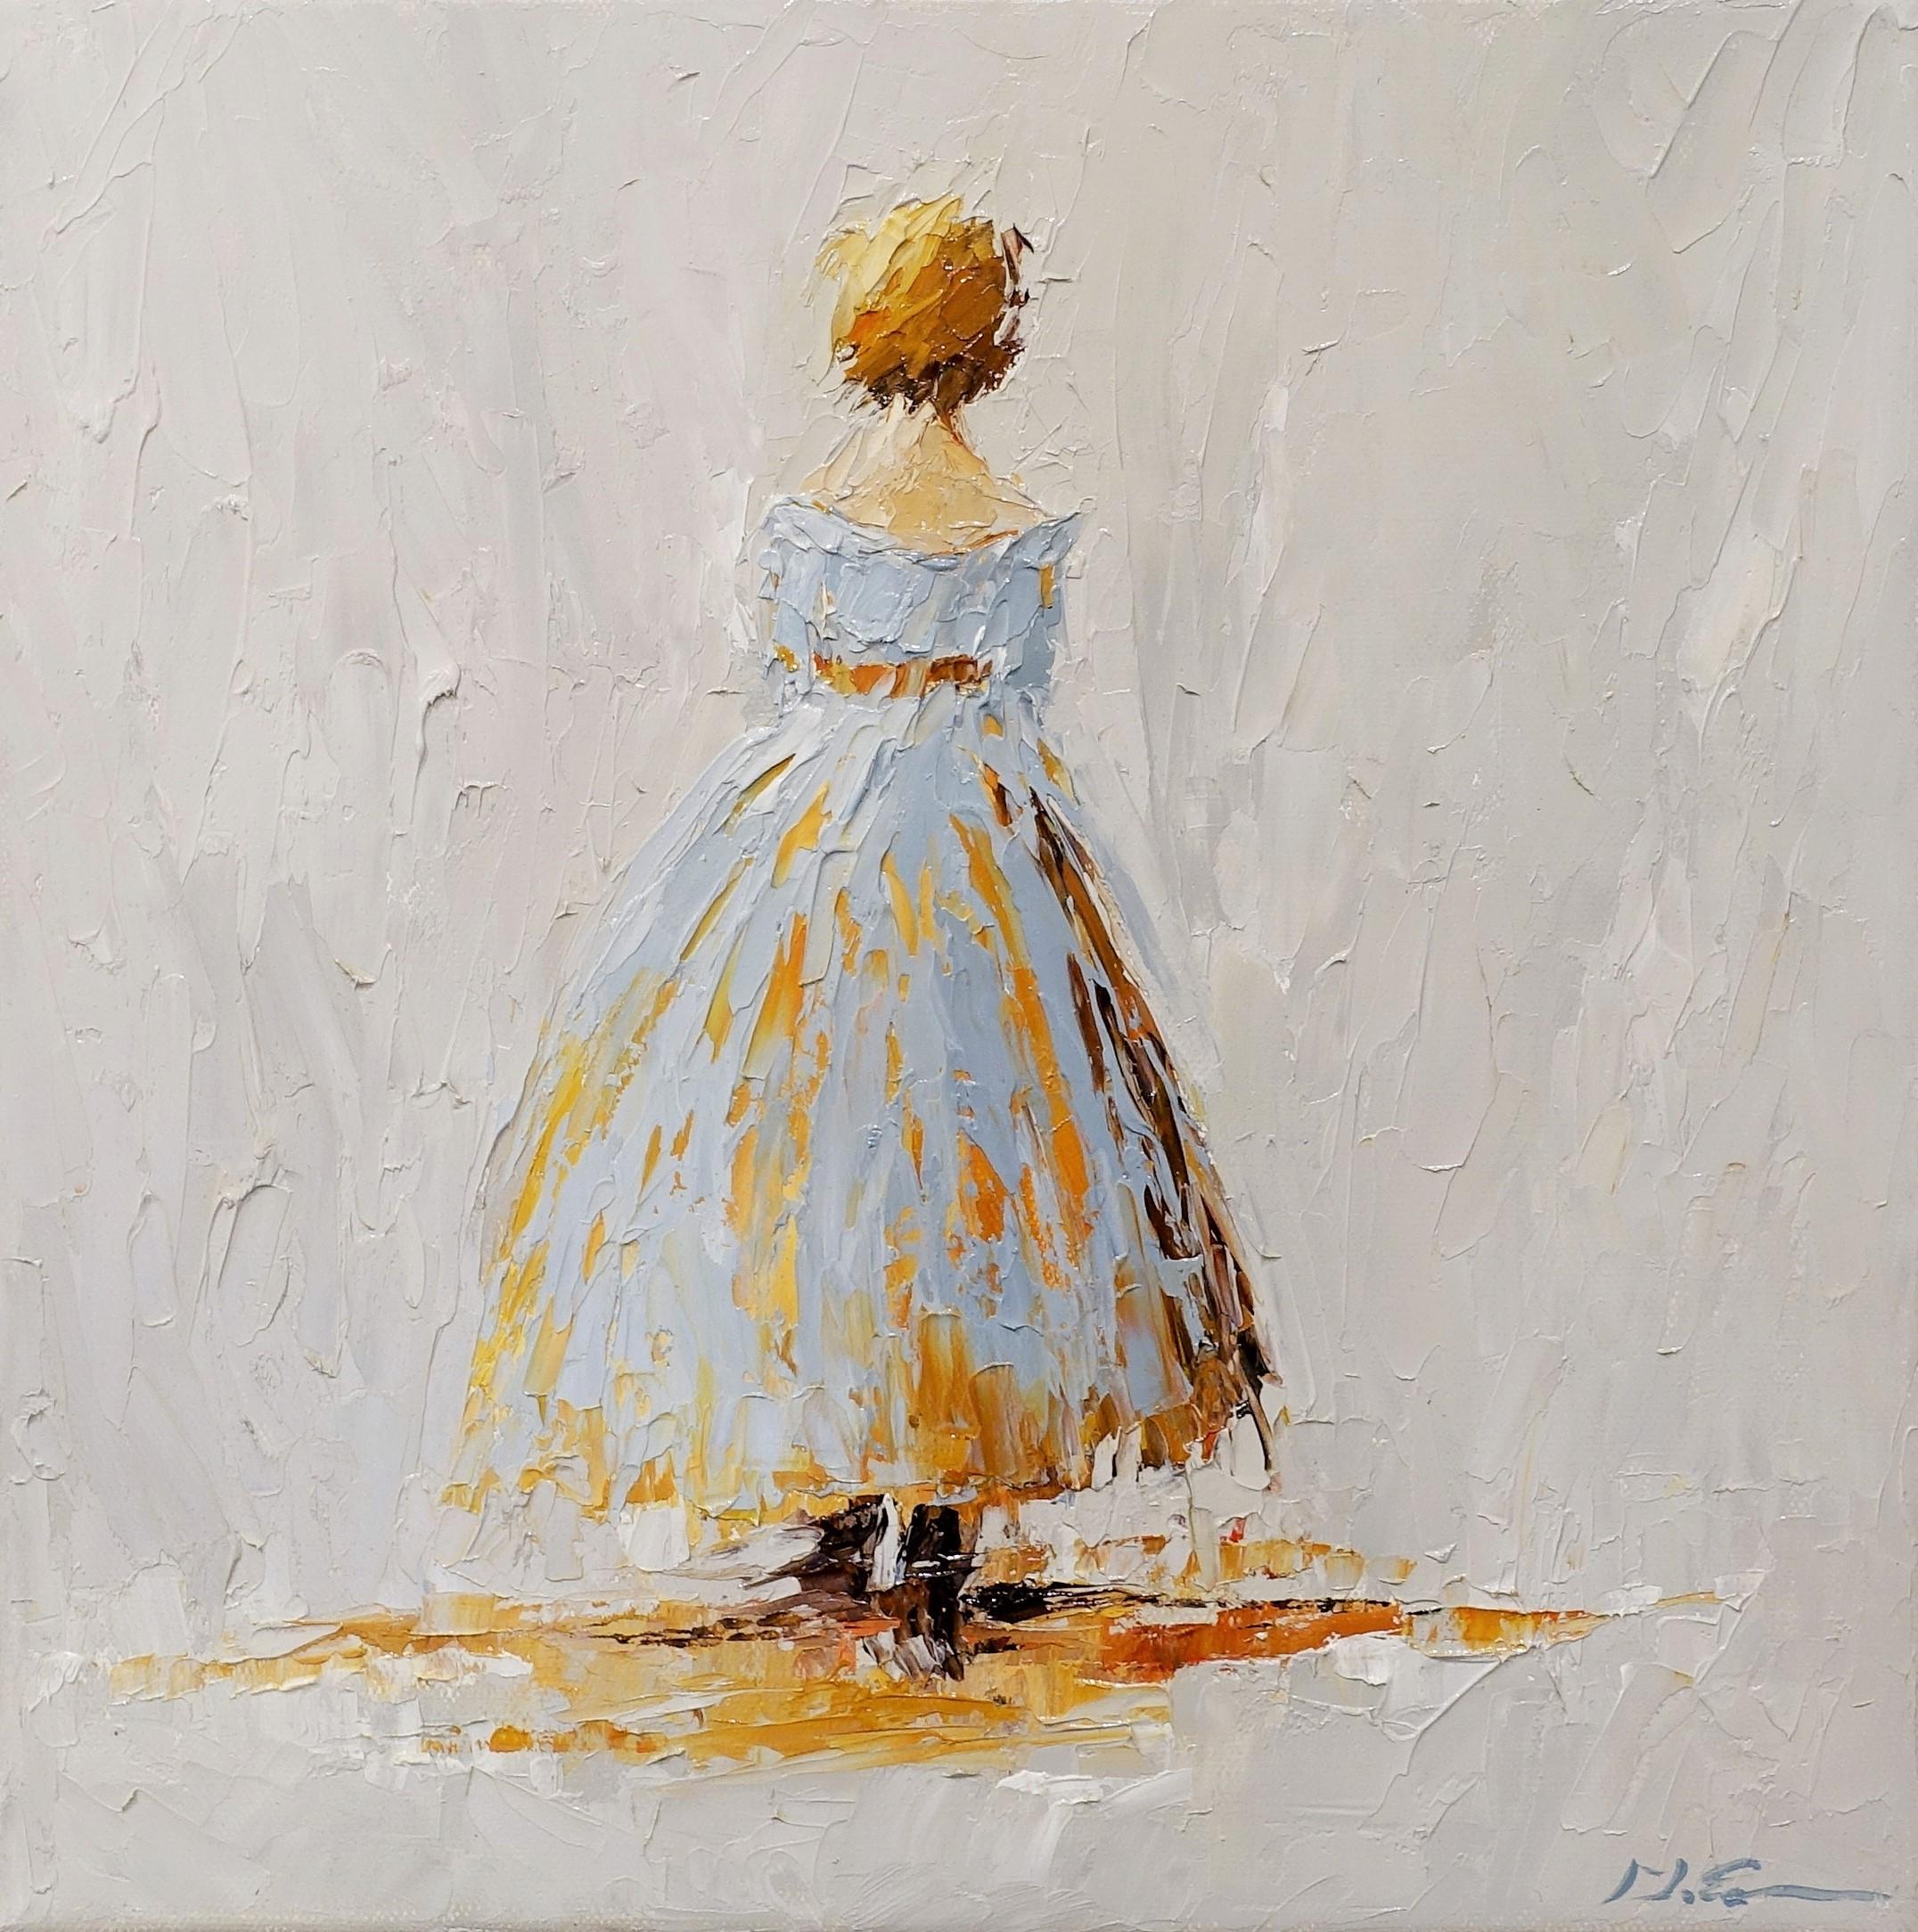 'Amelia', is a small framed Impressionist oil on canvas portrait painting created by American artist Geri Eubanks in 2019. Featuring a palette made of light grey and warm golden tones, the painting depicts a lady represented from the back, walking